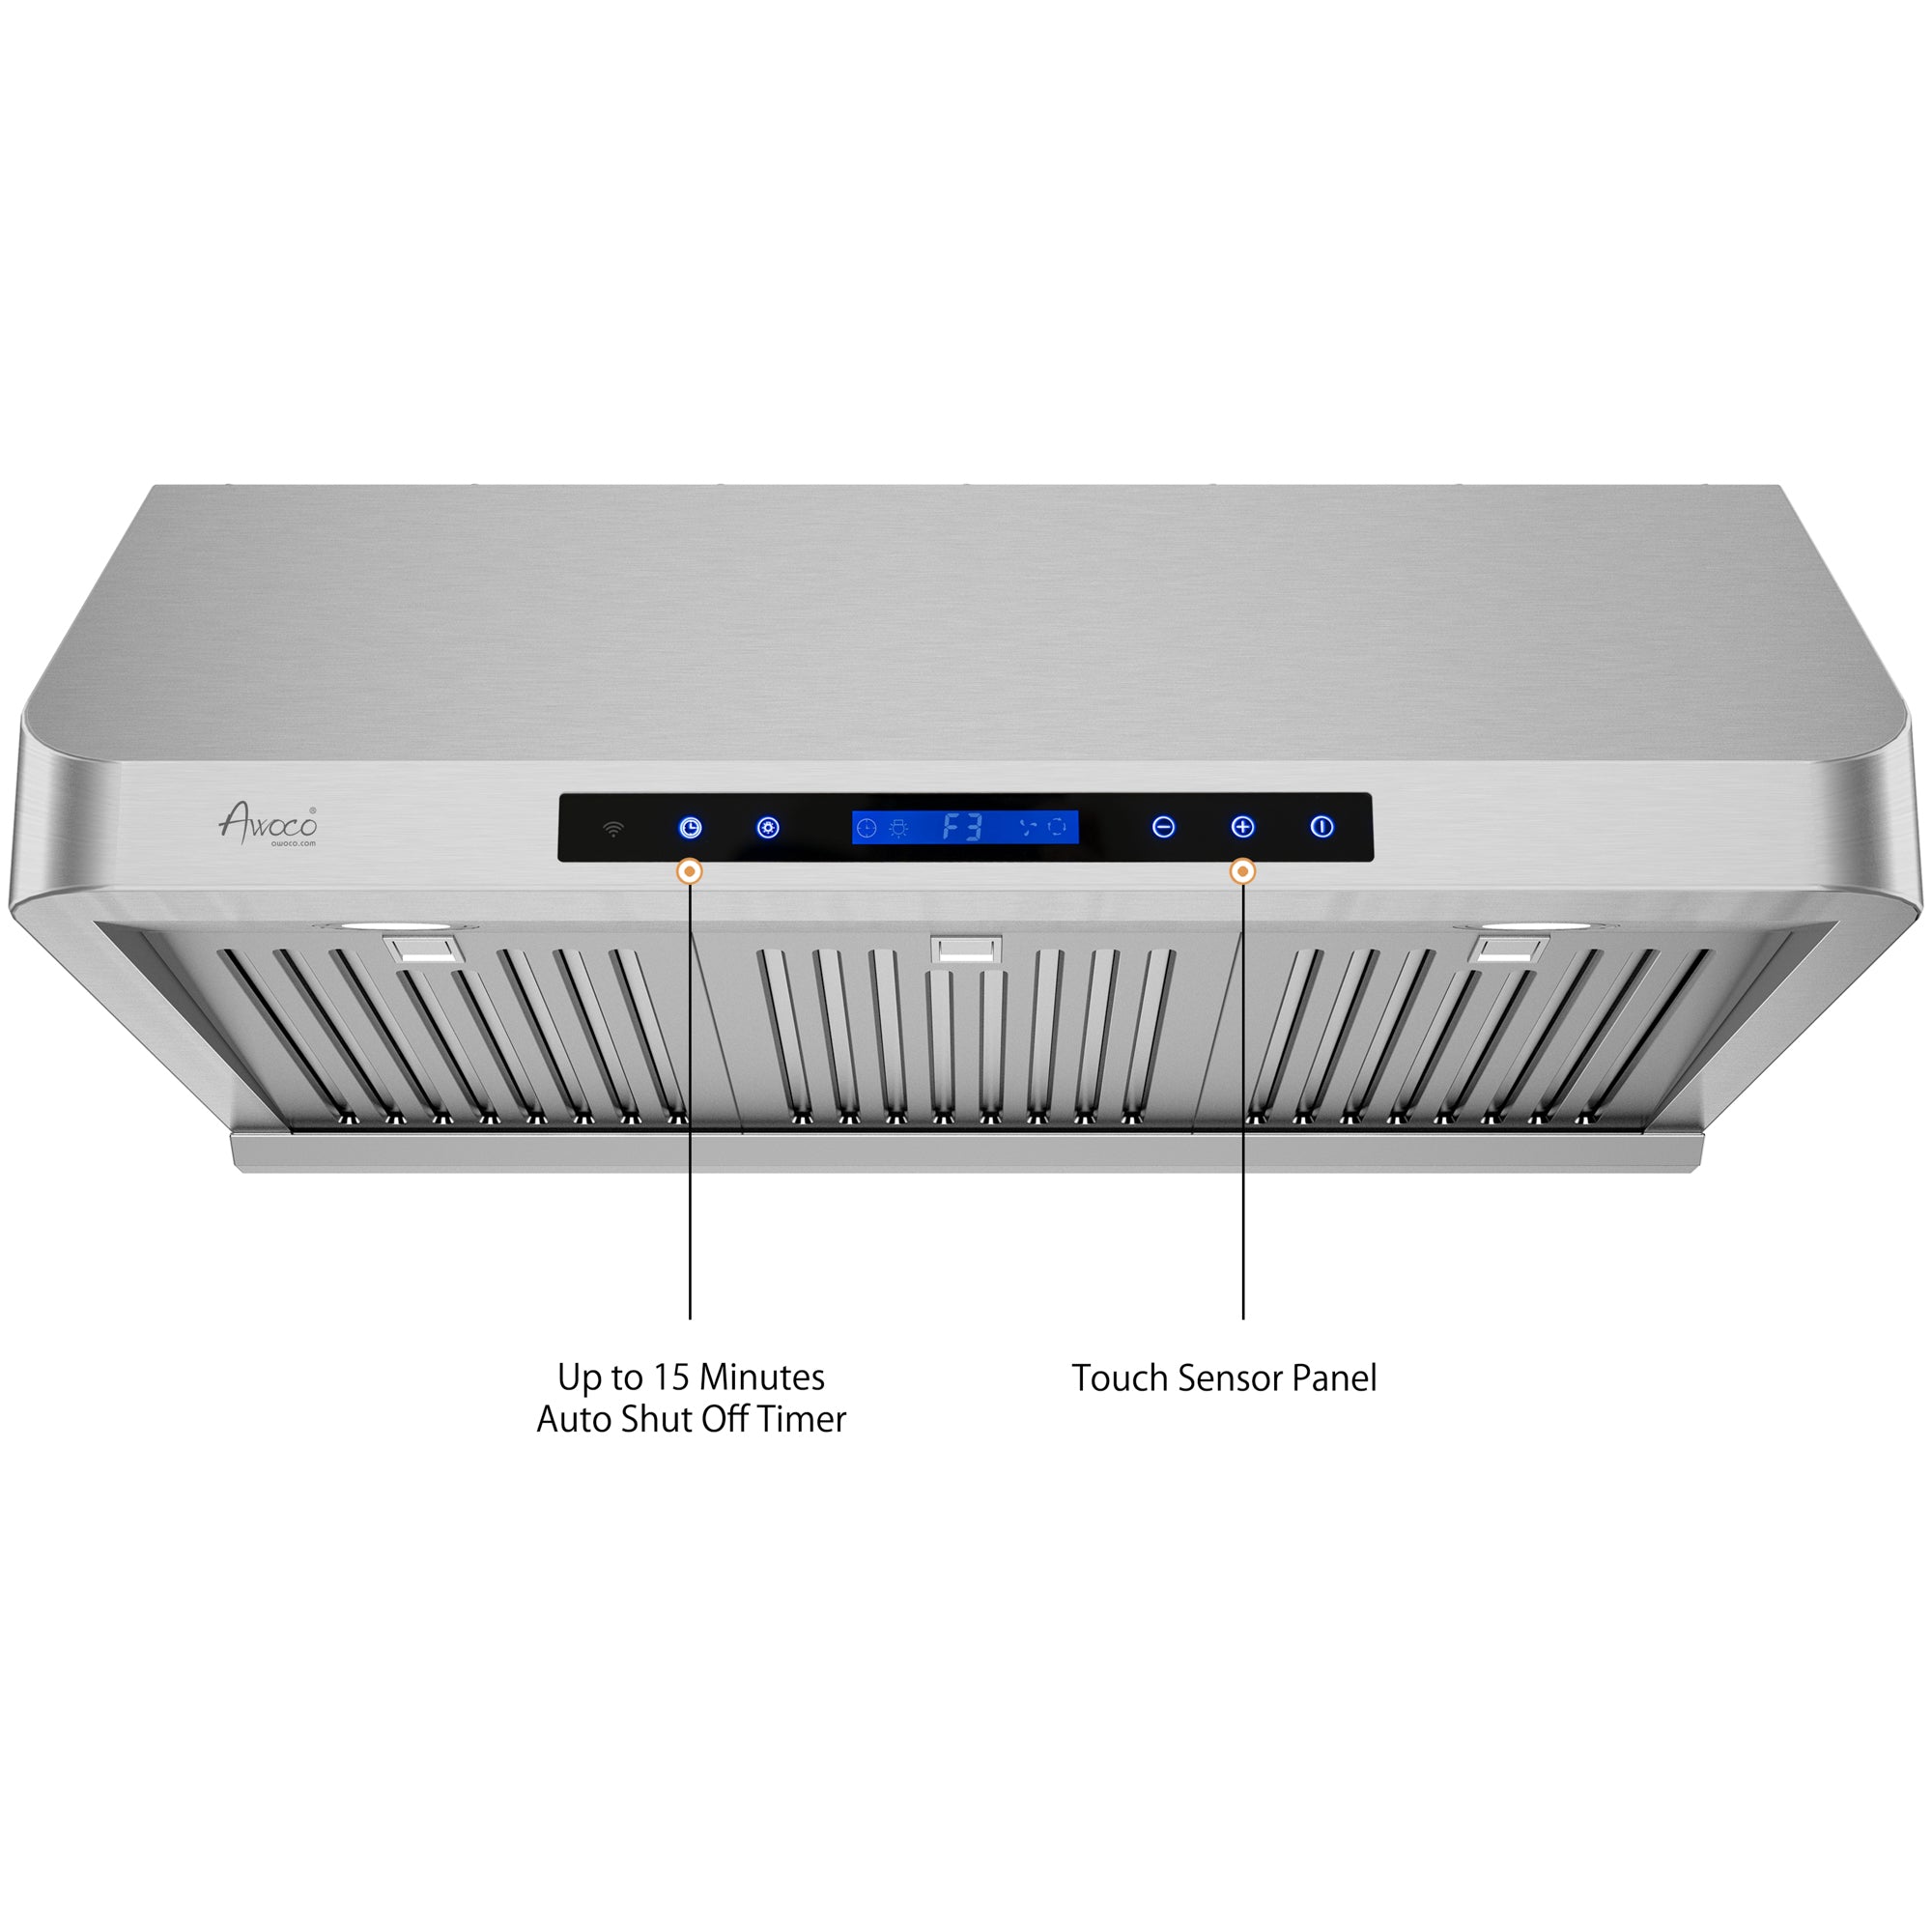 Awoco RH-S10-36E Supreme 10” High Stainless Steel Under Cabinet Range Hood 4 Speeds, 8” Round Top Vent, 1000CFM 2 LED Lights, Remote Control & External Oil Collector (36"W)